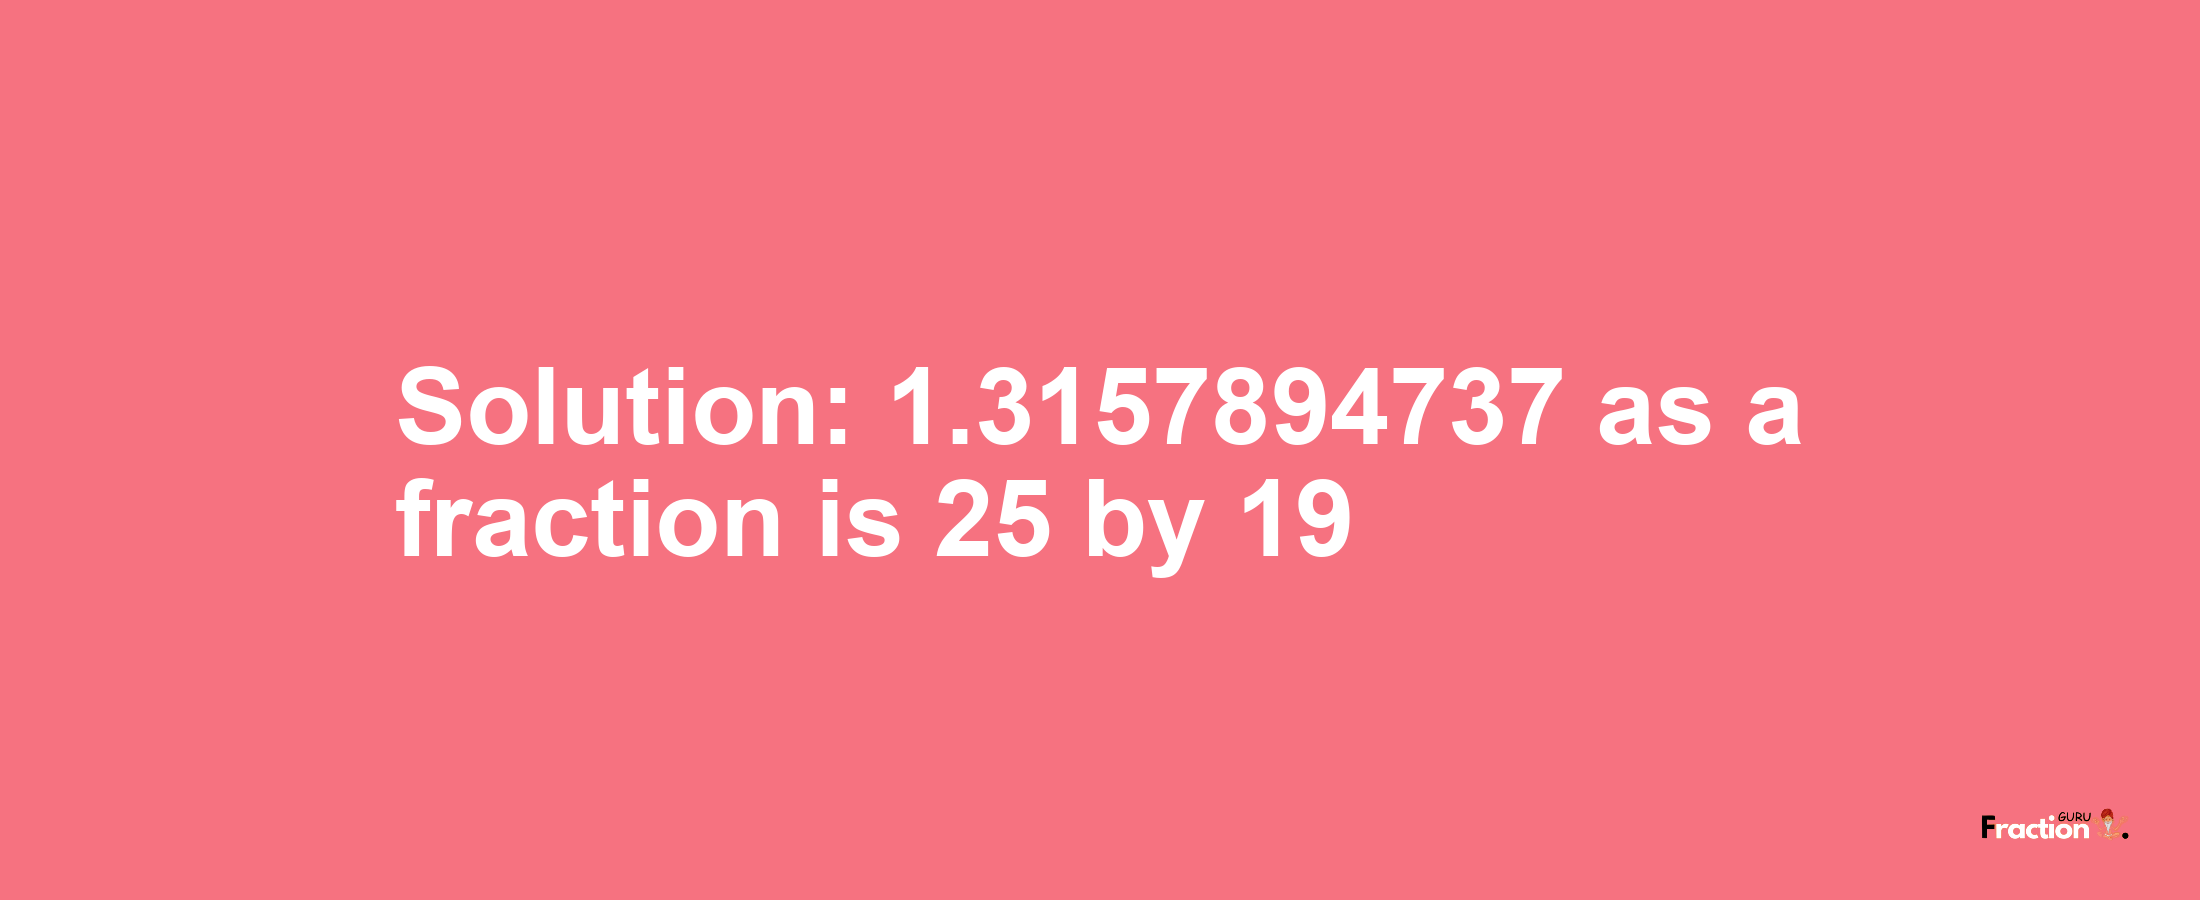 Solution:1.3157894737 as a fraction is 25/19